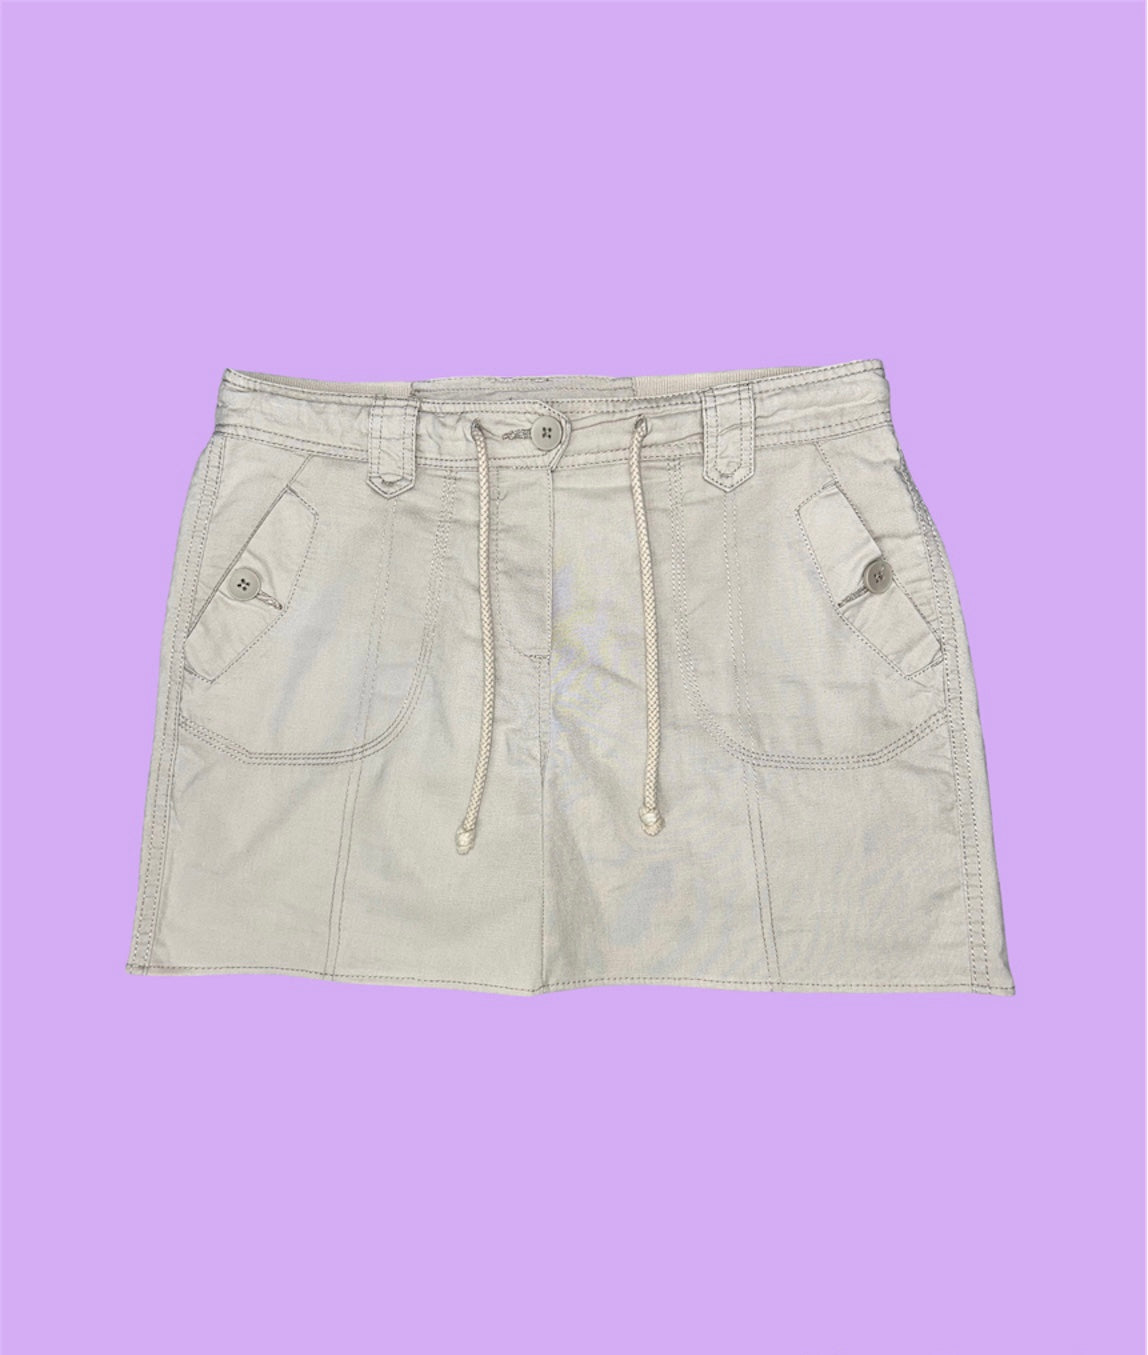 beige cargo mini skirt shown on a lilac background